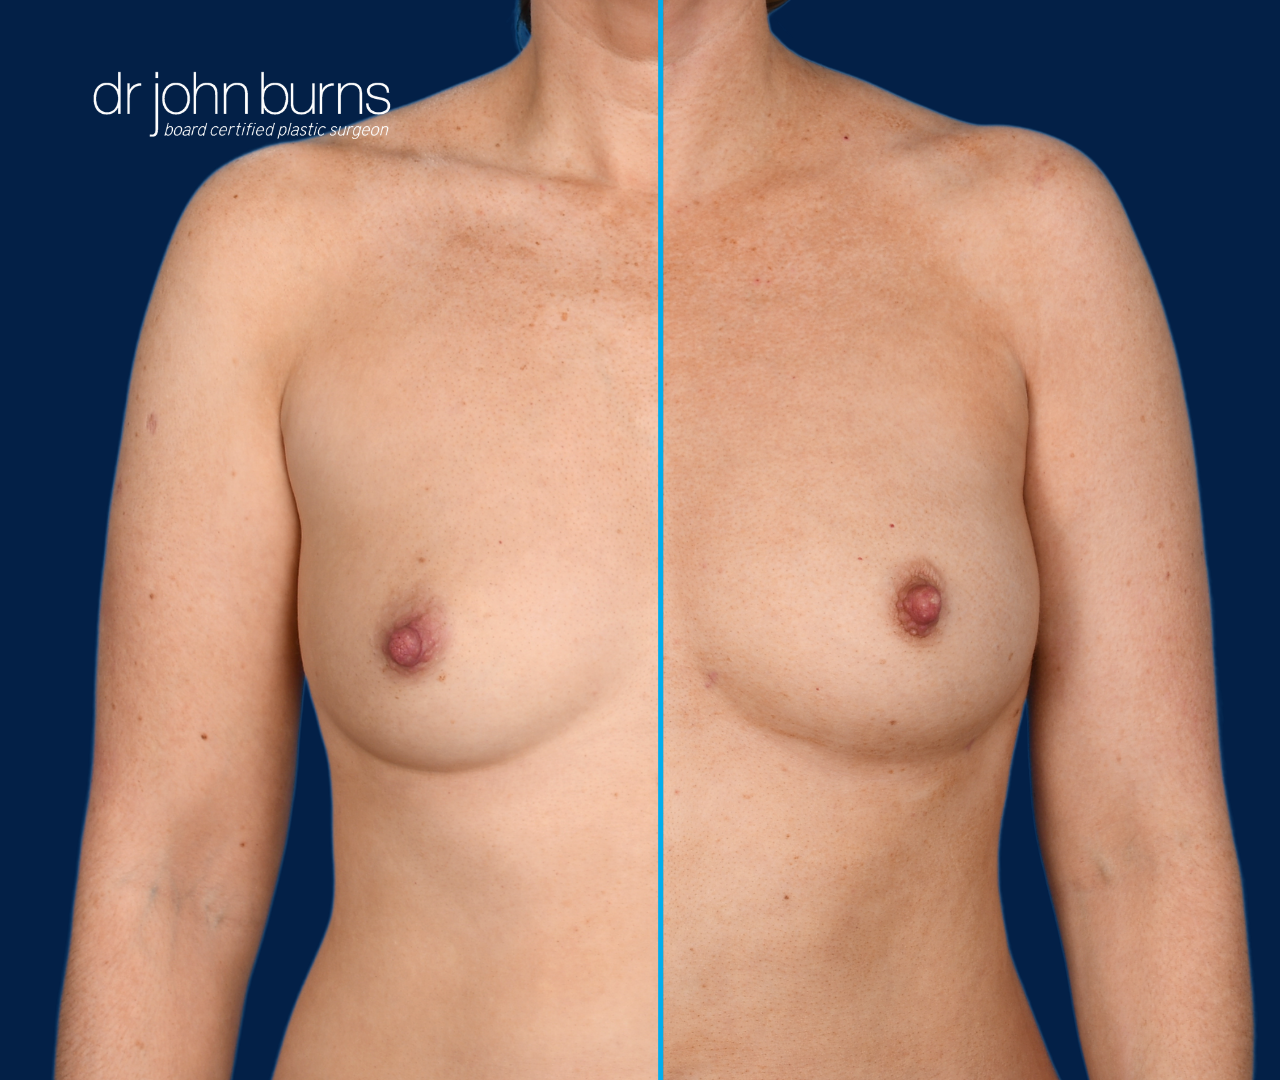 case 13- split screen before & after fat transfer to breast by top plastic surgeon, Dr. John Burns